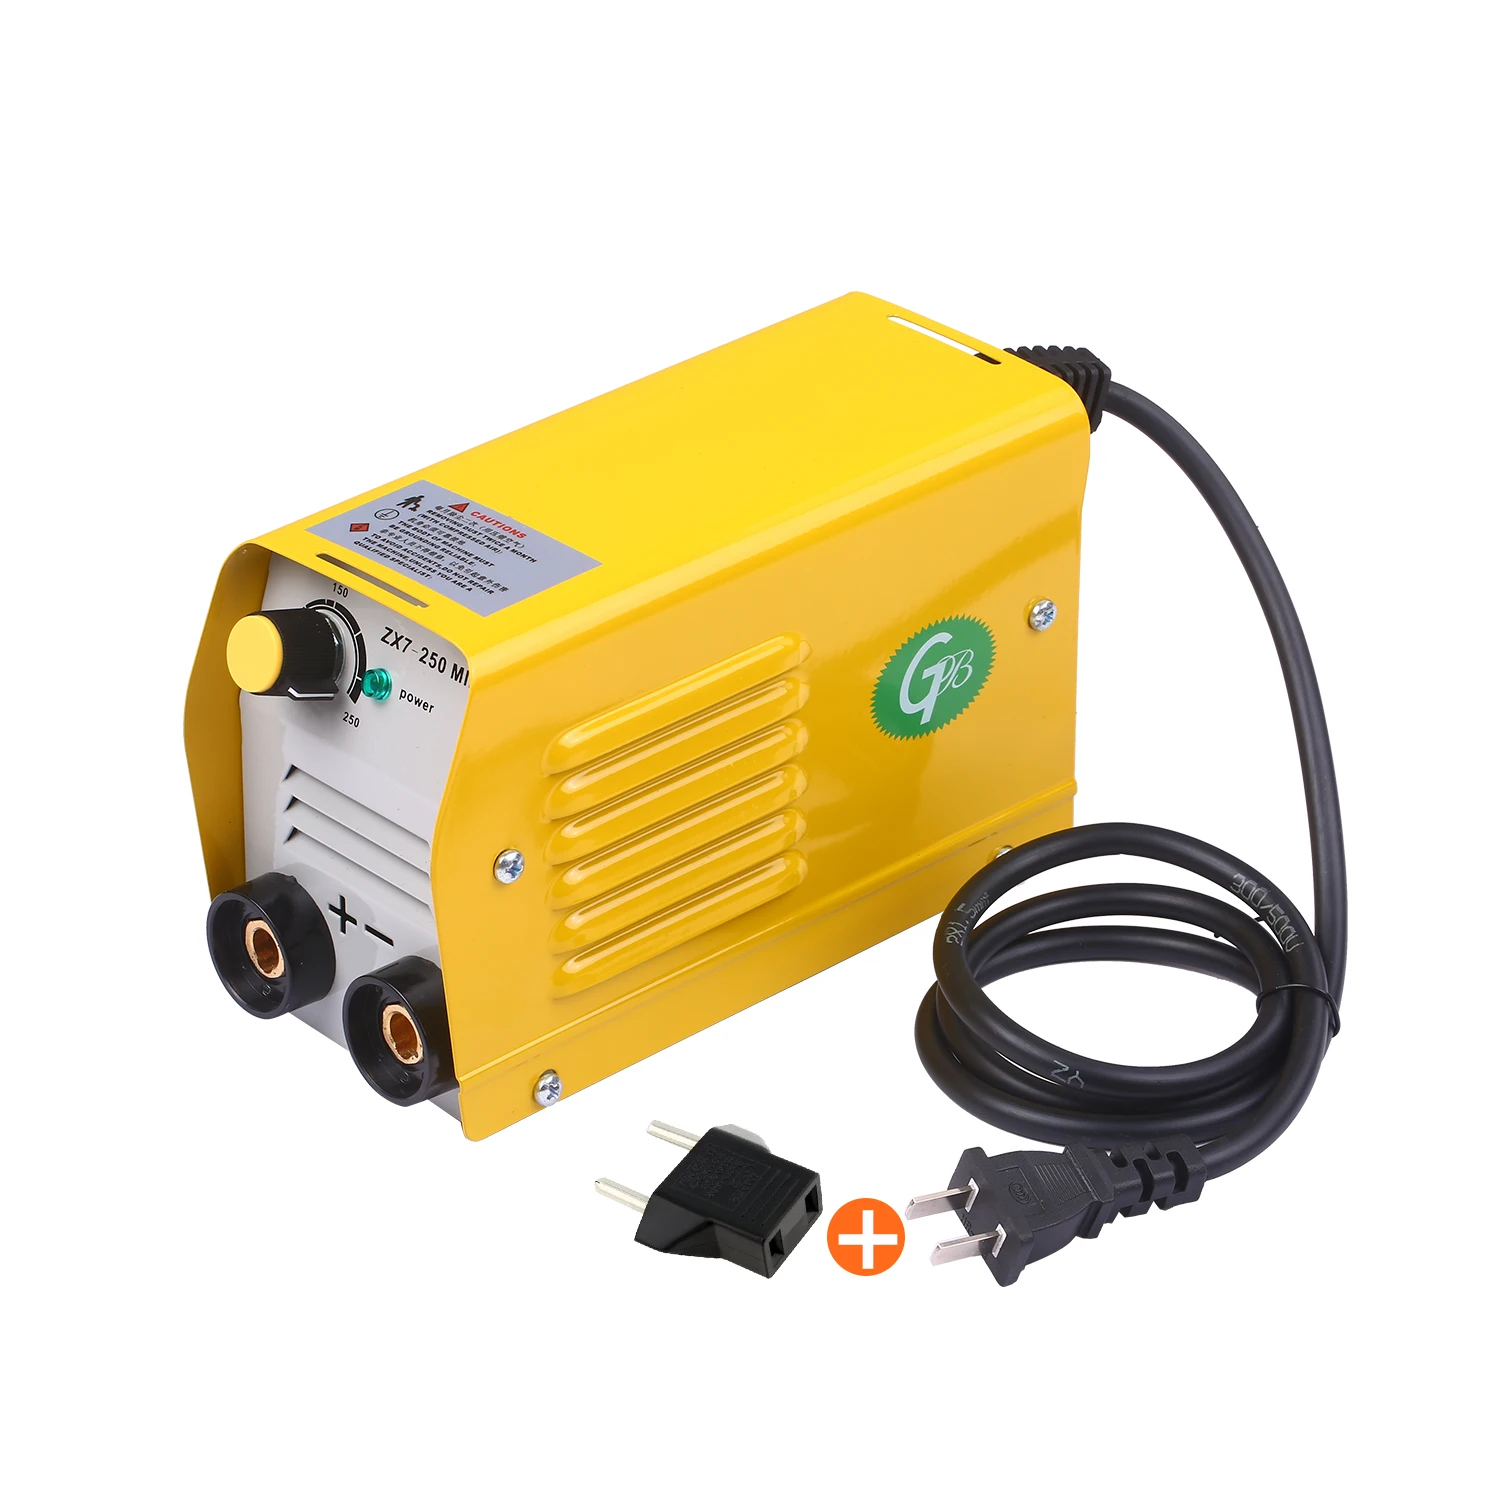 

Professional Mini Electric Arc Welder 250Amps IGBT Welding Machine Anti-Stick for 2.5-3.2mm Rods for Welding Electric Work